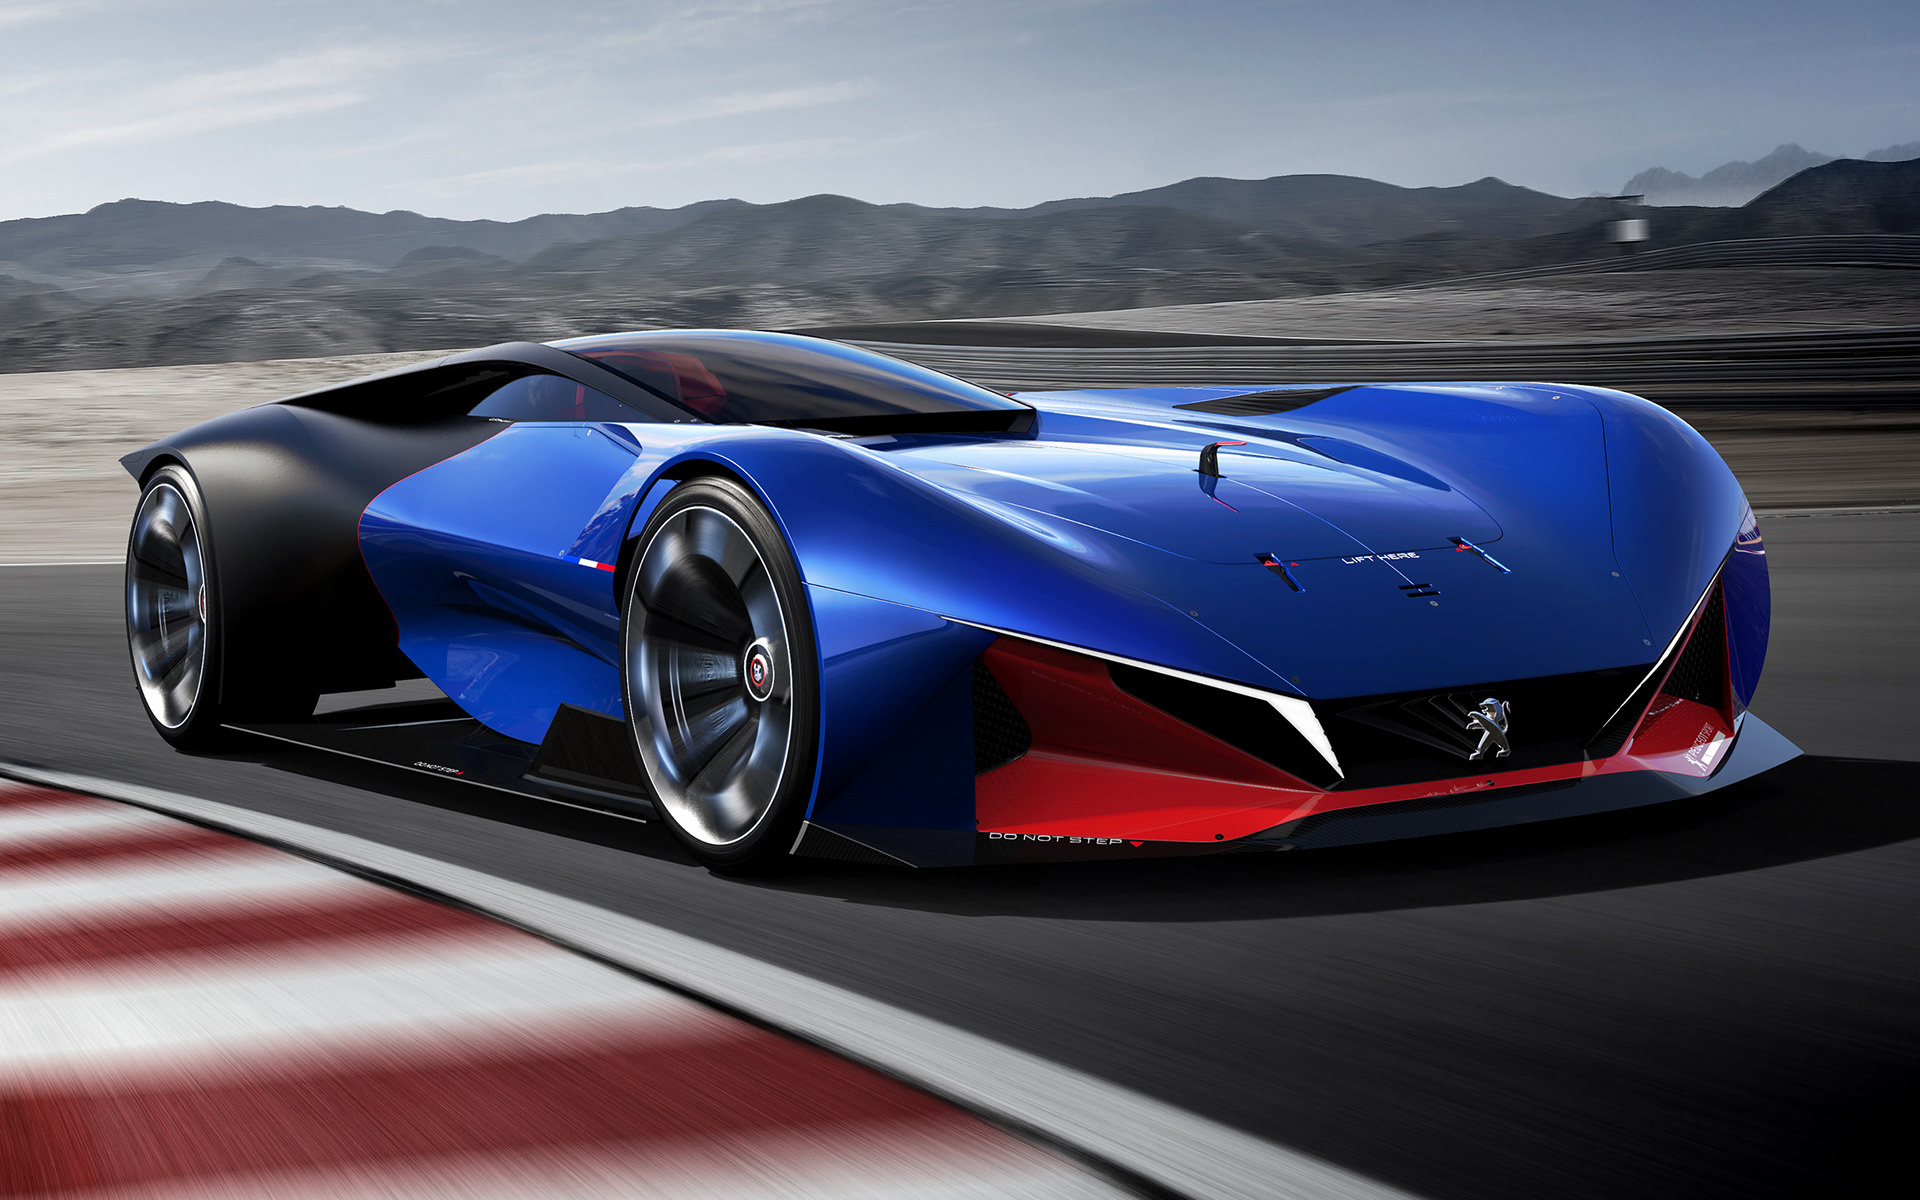 2022 Peugeot L500 R HYbrid Concept Wallpapers and HD 